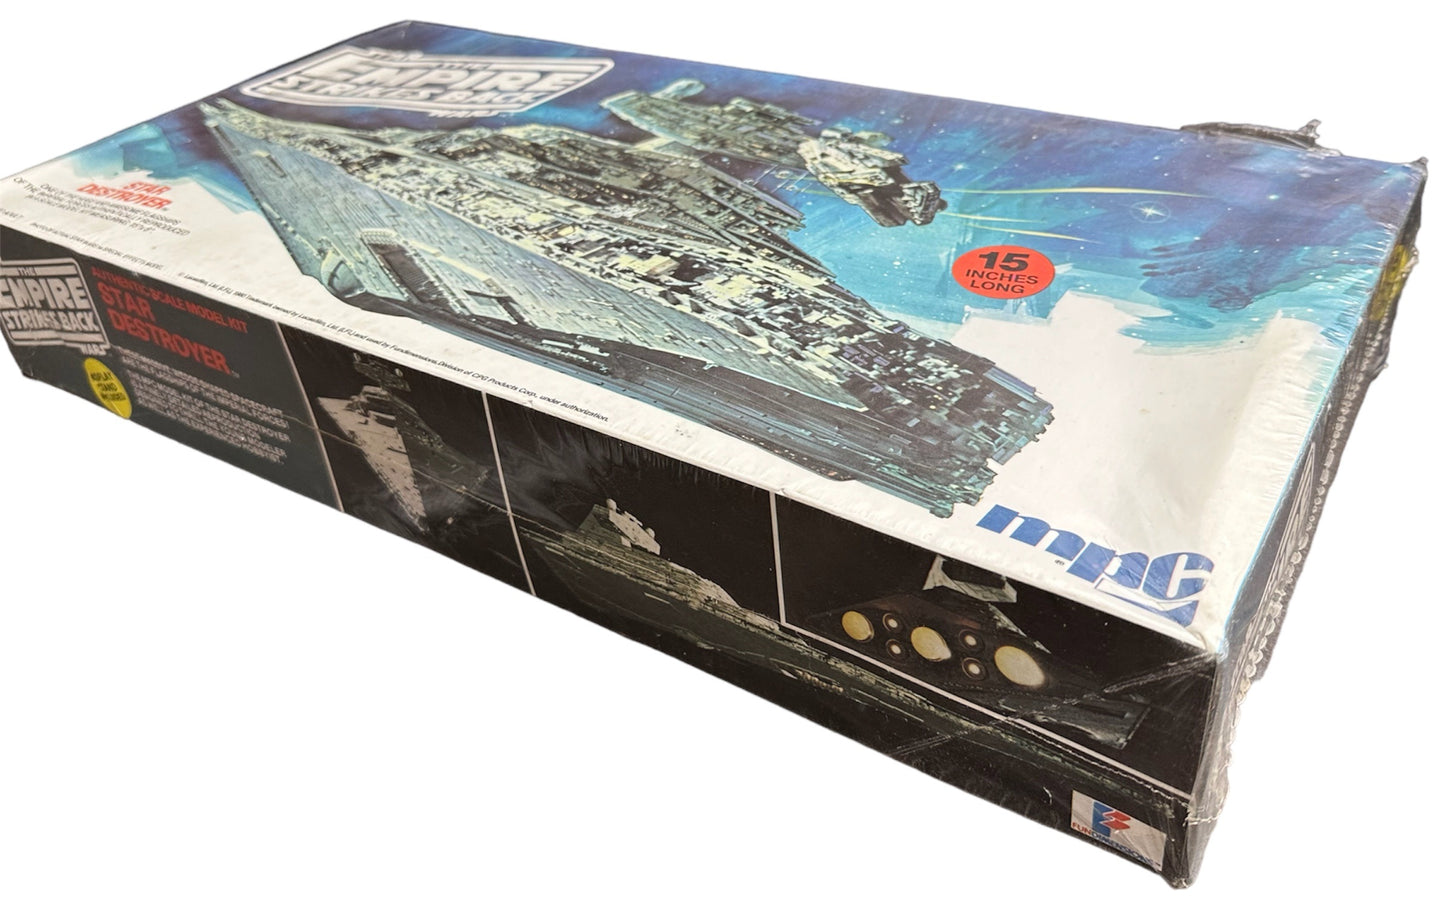 Vintage MPC/FD 1980 Ultra Rare Star Wars The Empire Strikes Back Imperial Forces Star Destroyer Scale Model Kit - Factory Sealed Shop Stock Room Find